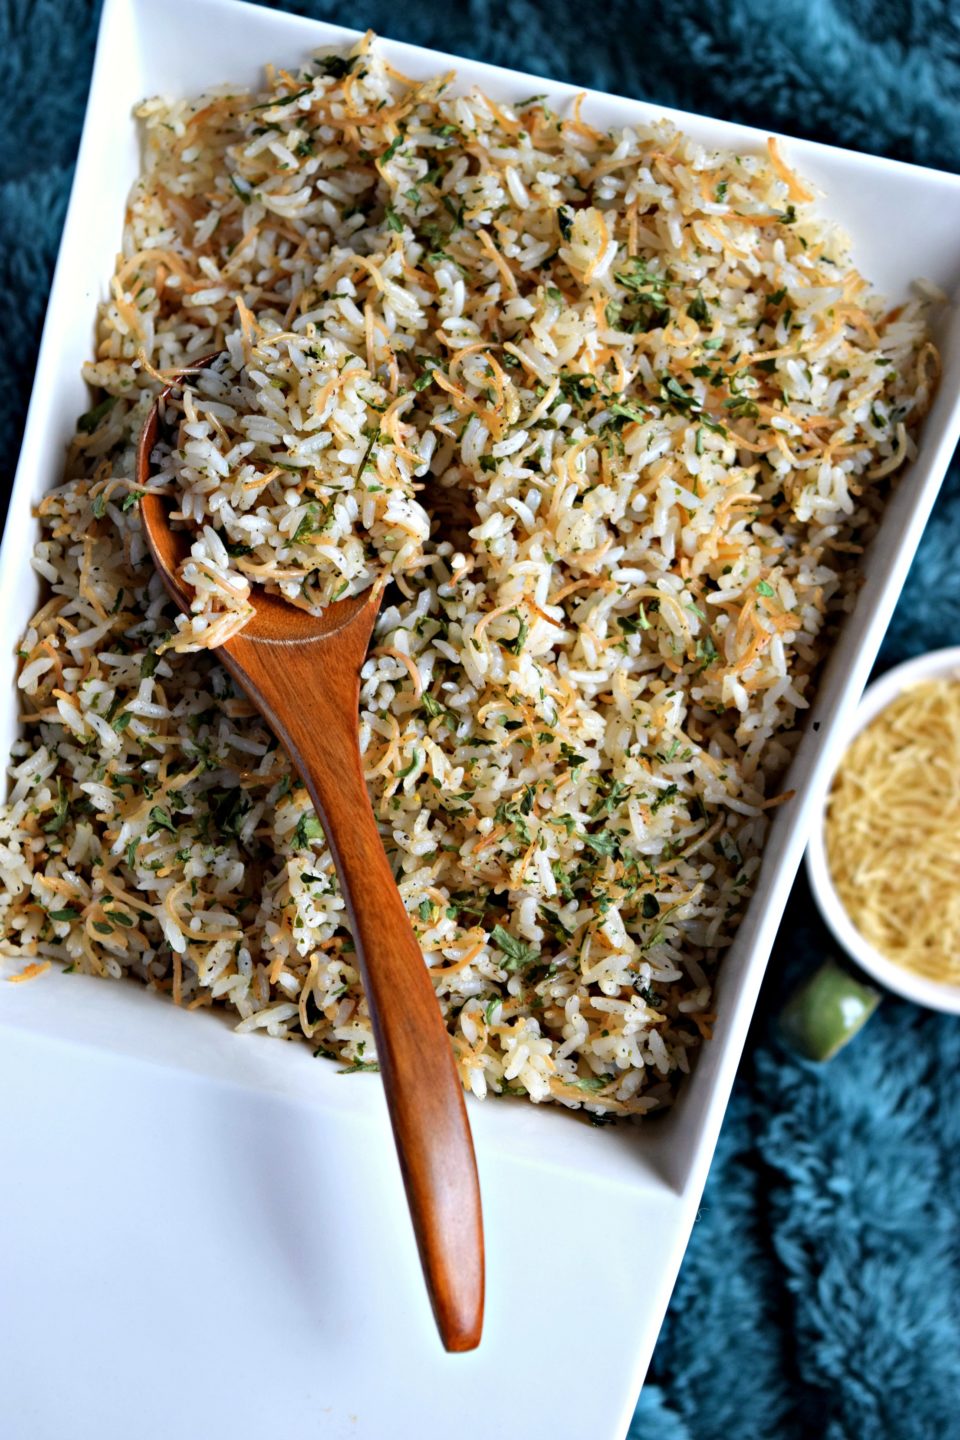 LEBANESE RICE WITH VERMICELLI